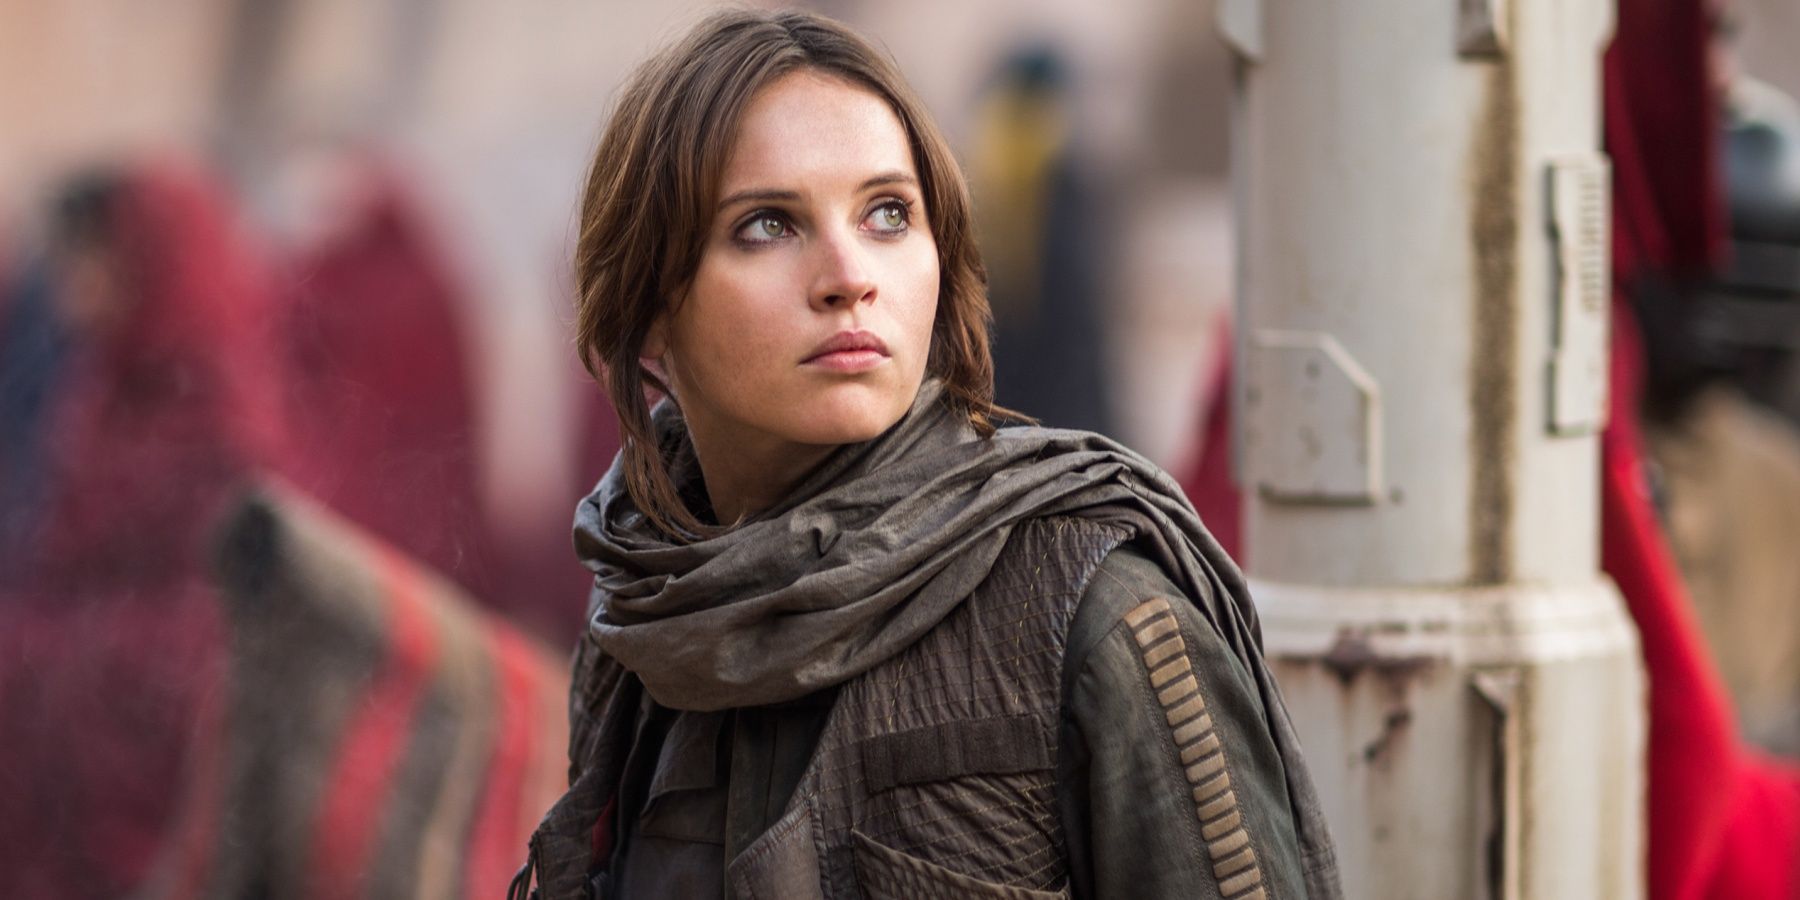 jyn erso in star wars, lookng over her shoulder in jedha city